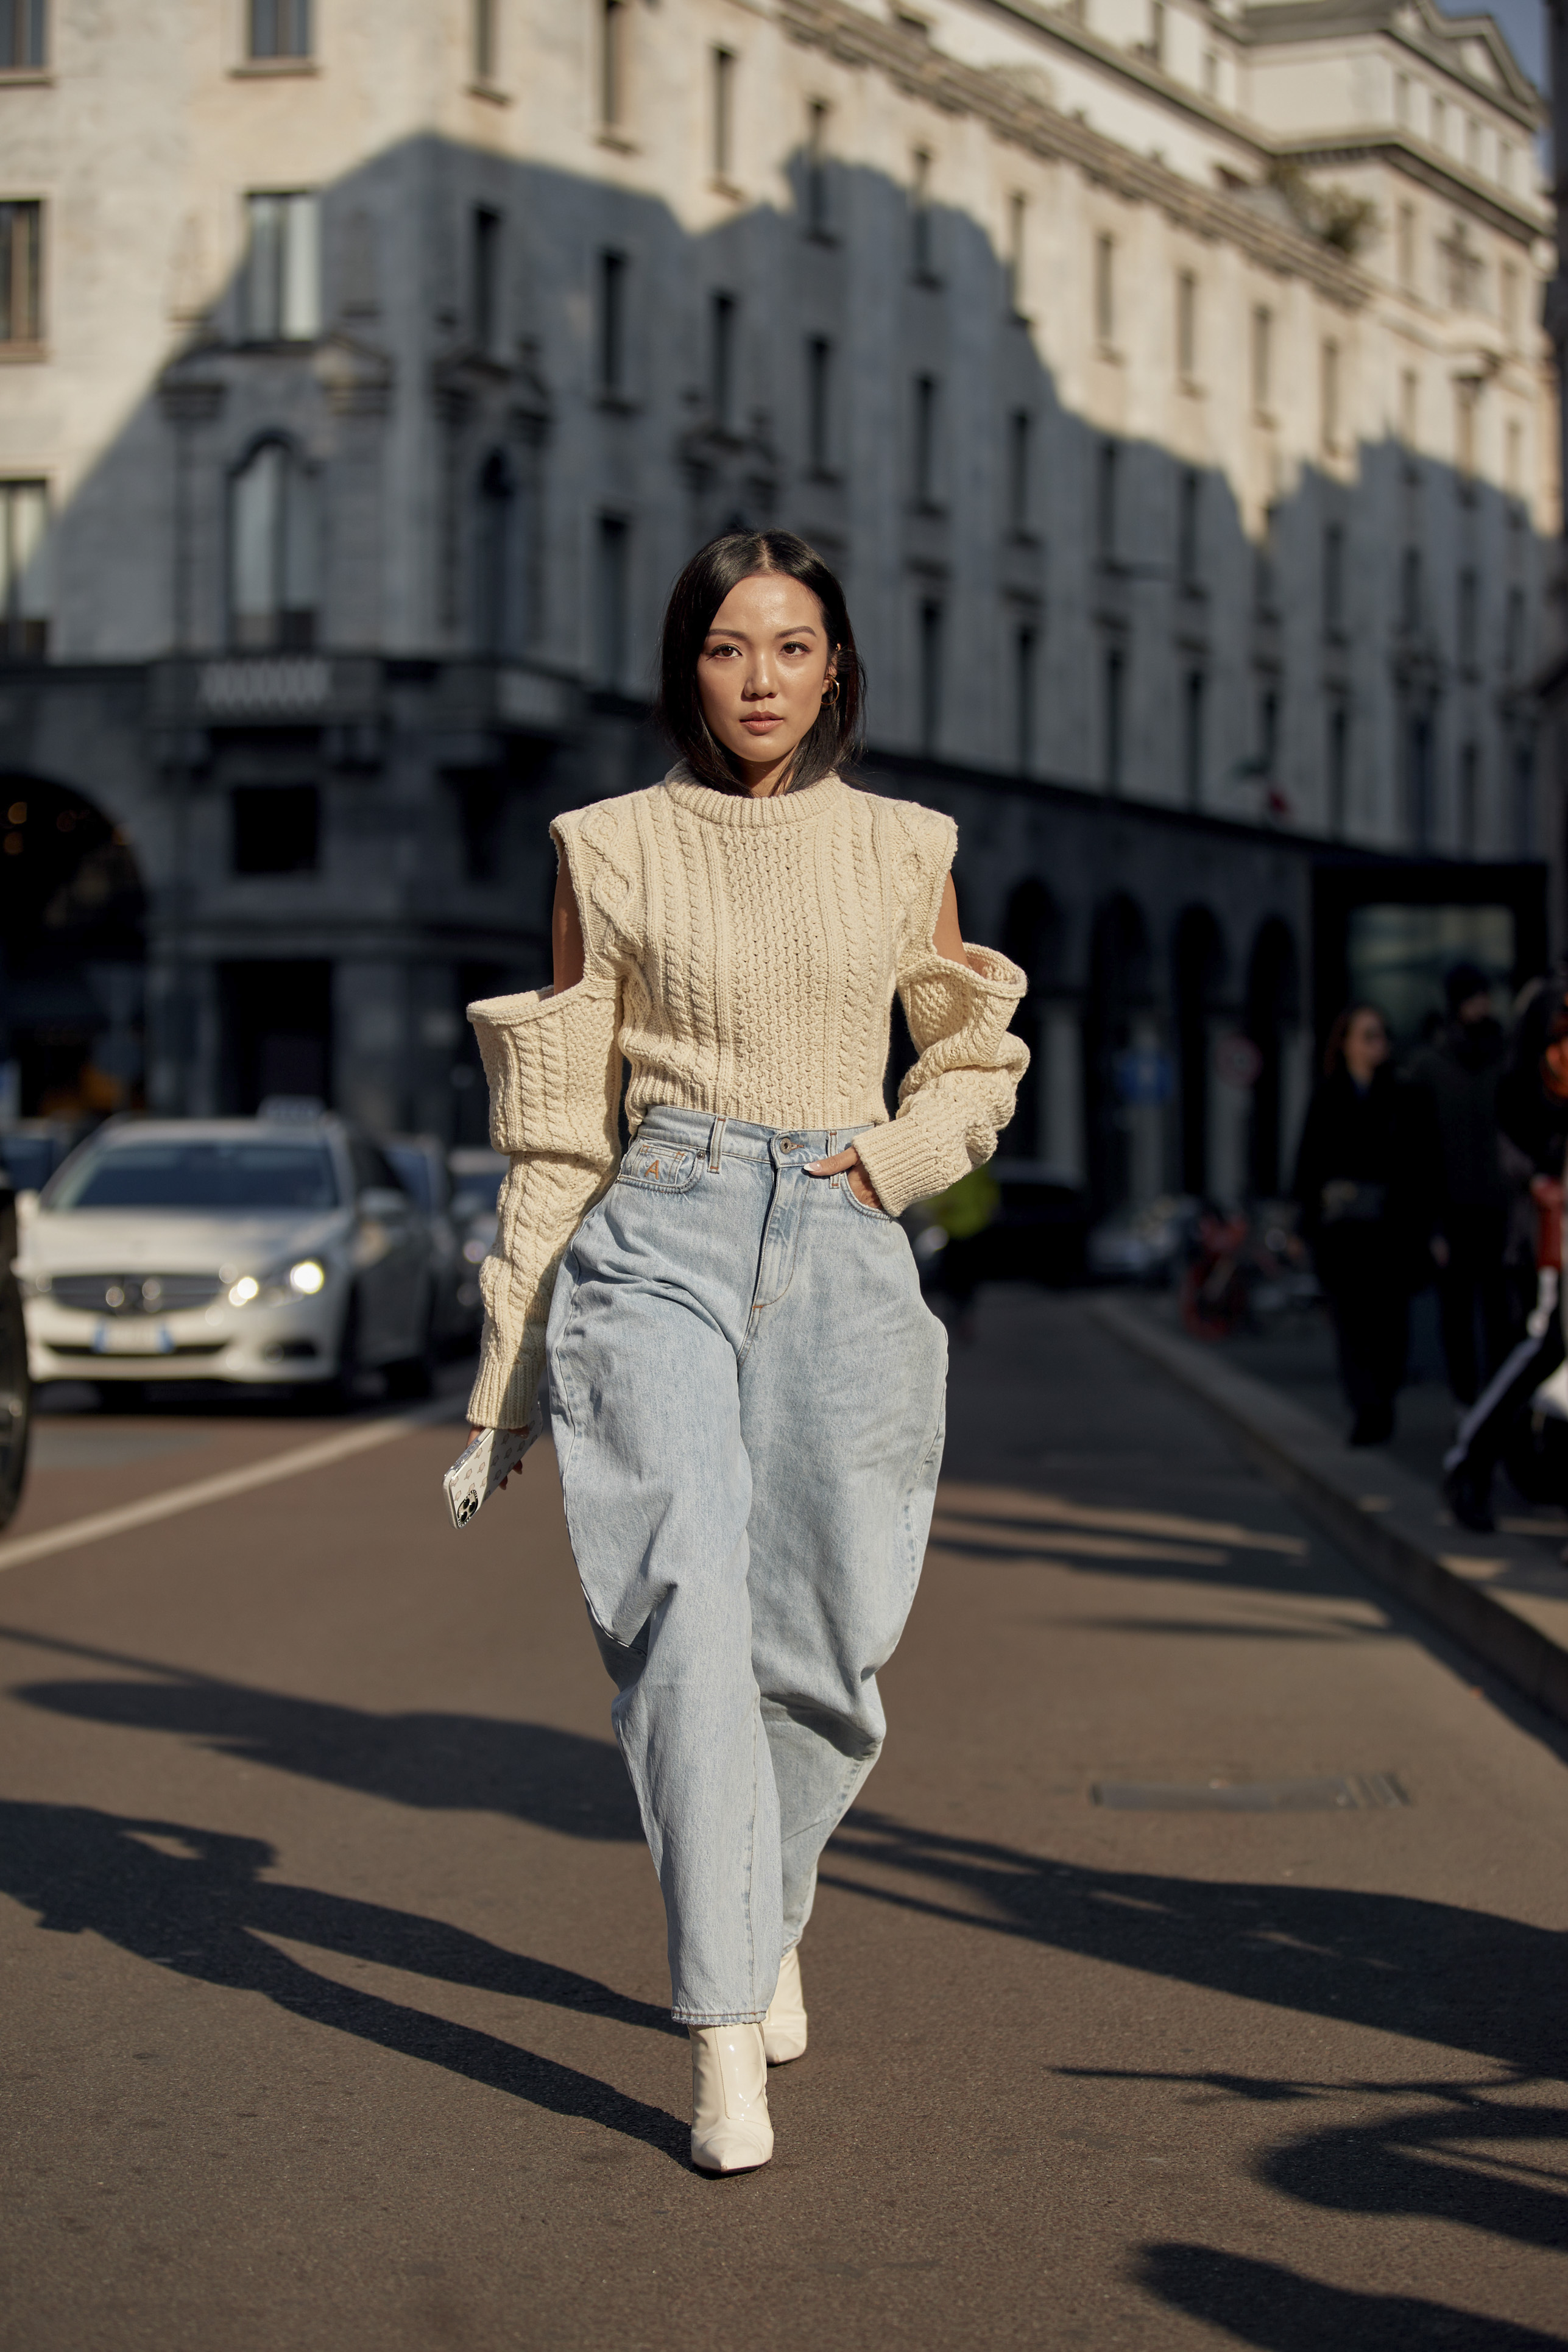 The Best MFW Street Style Looks to Inspire Your Dressing - FASHION Magazine